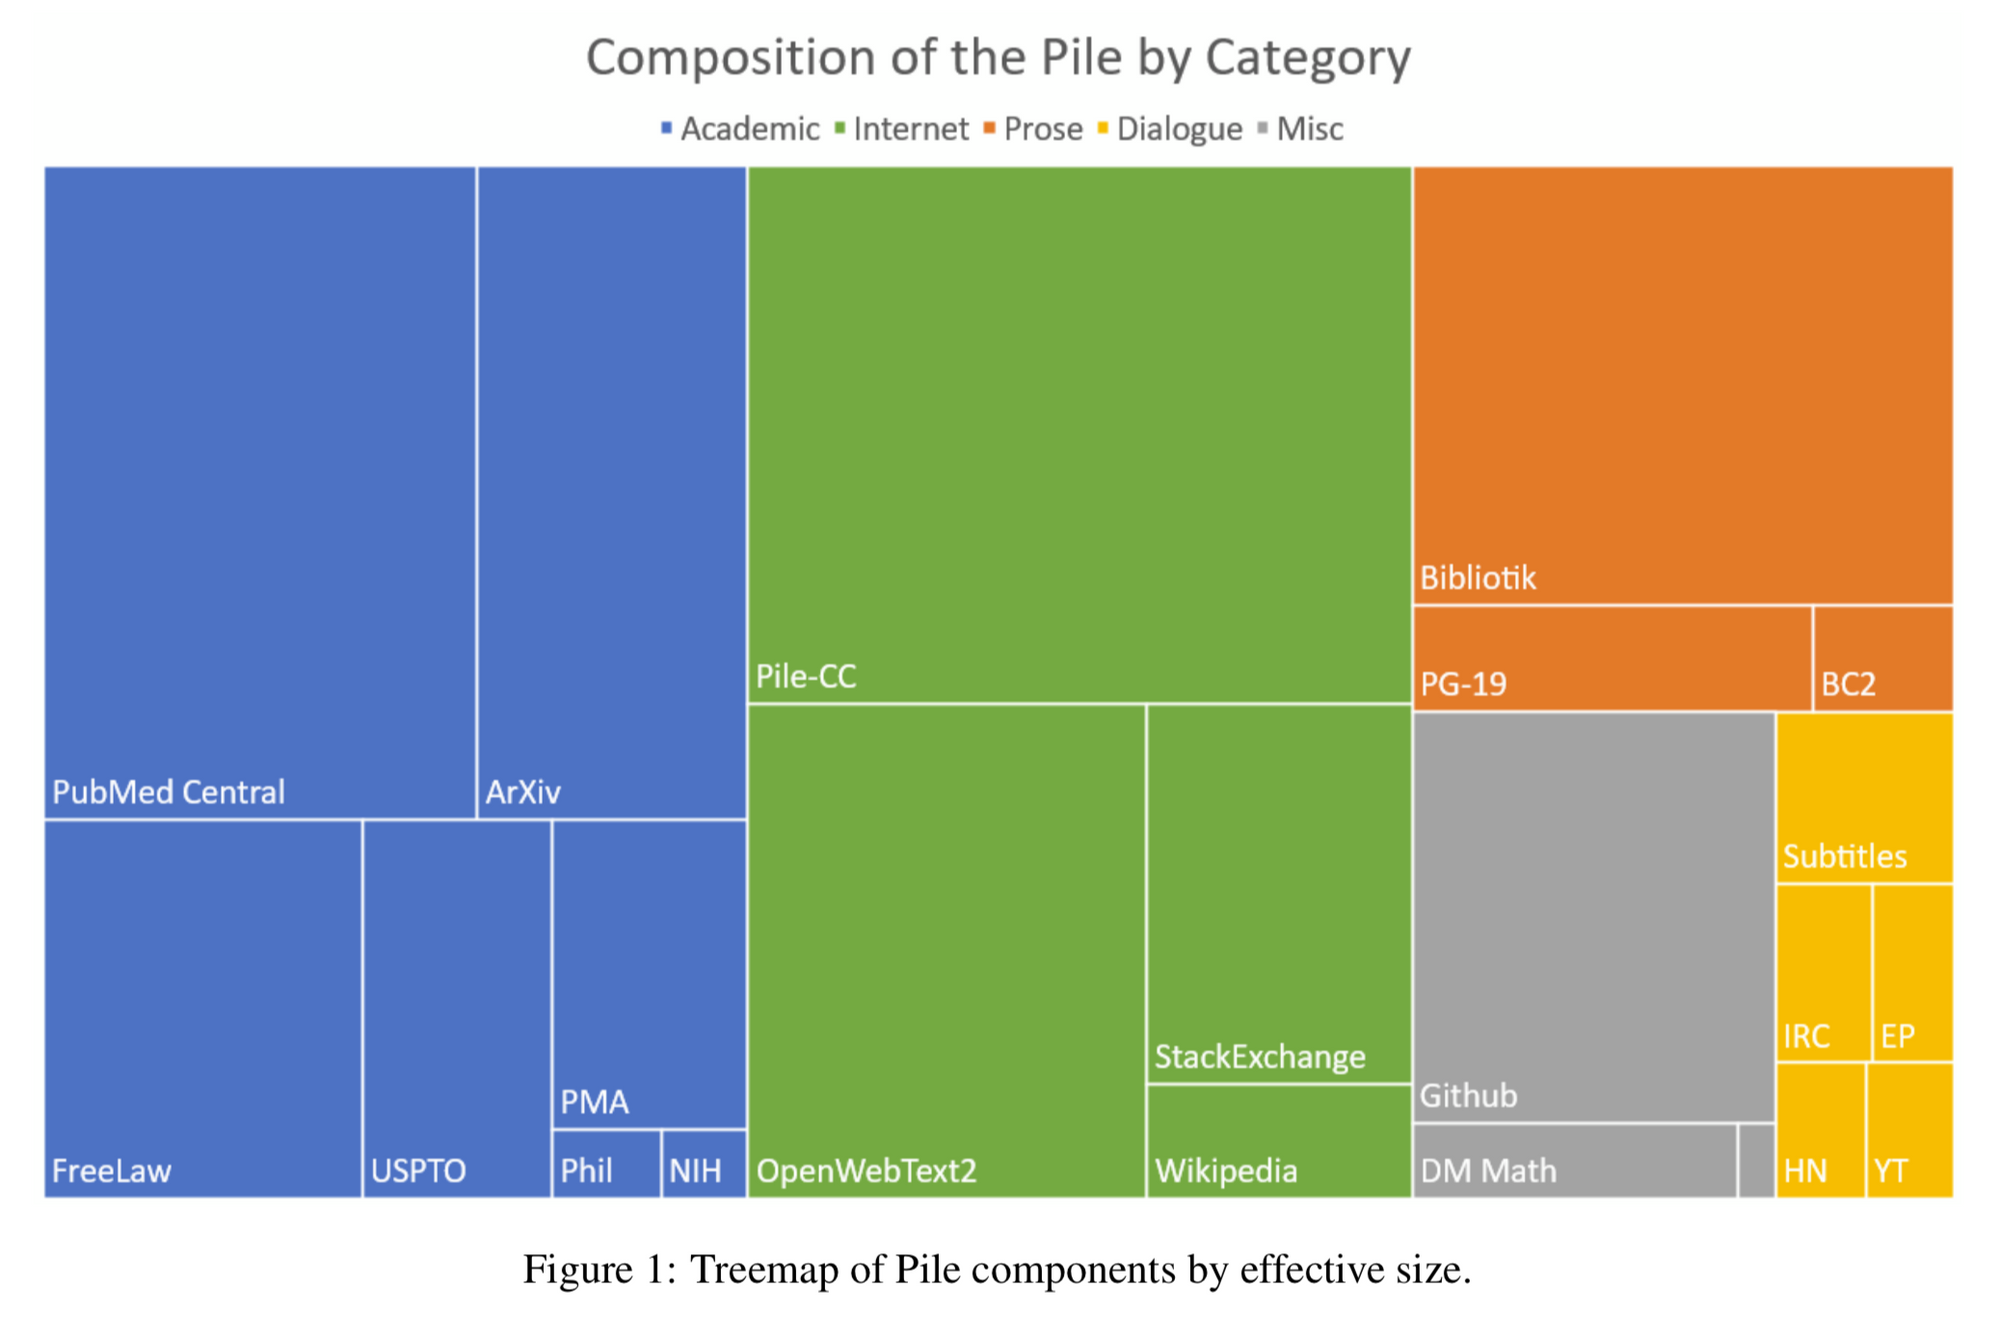 Treemap of Pile components by effective size, showing that Wikipedia is a small component.